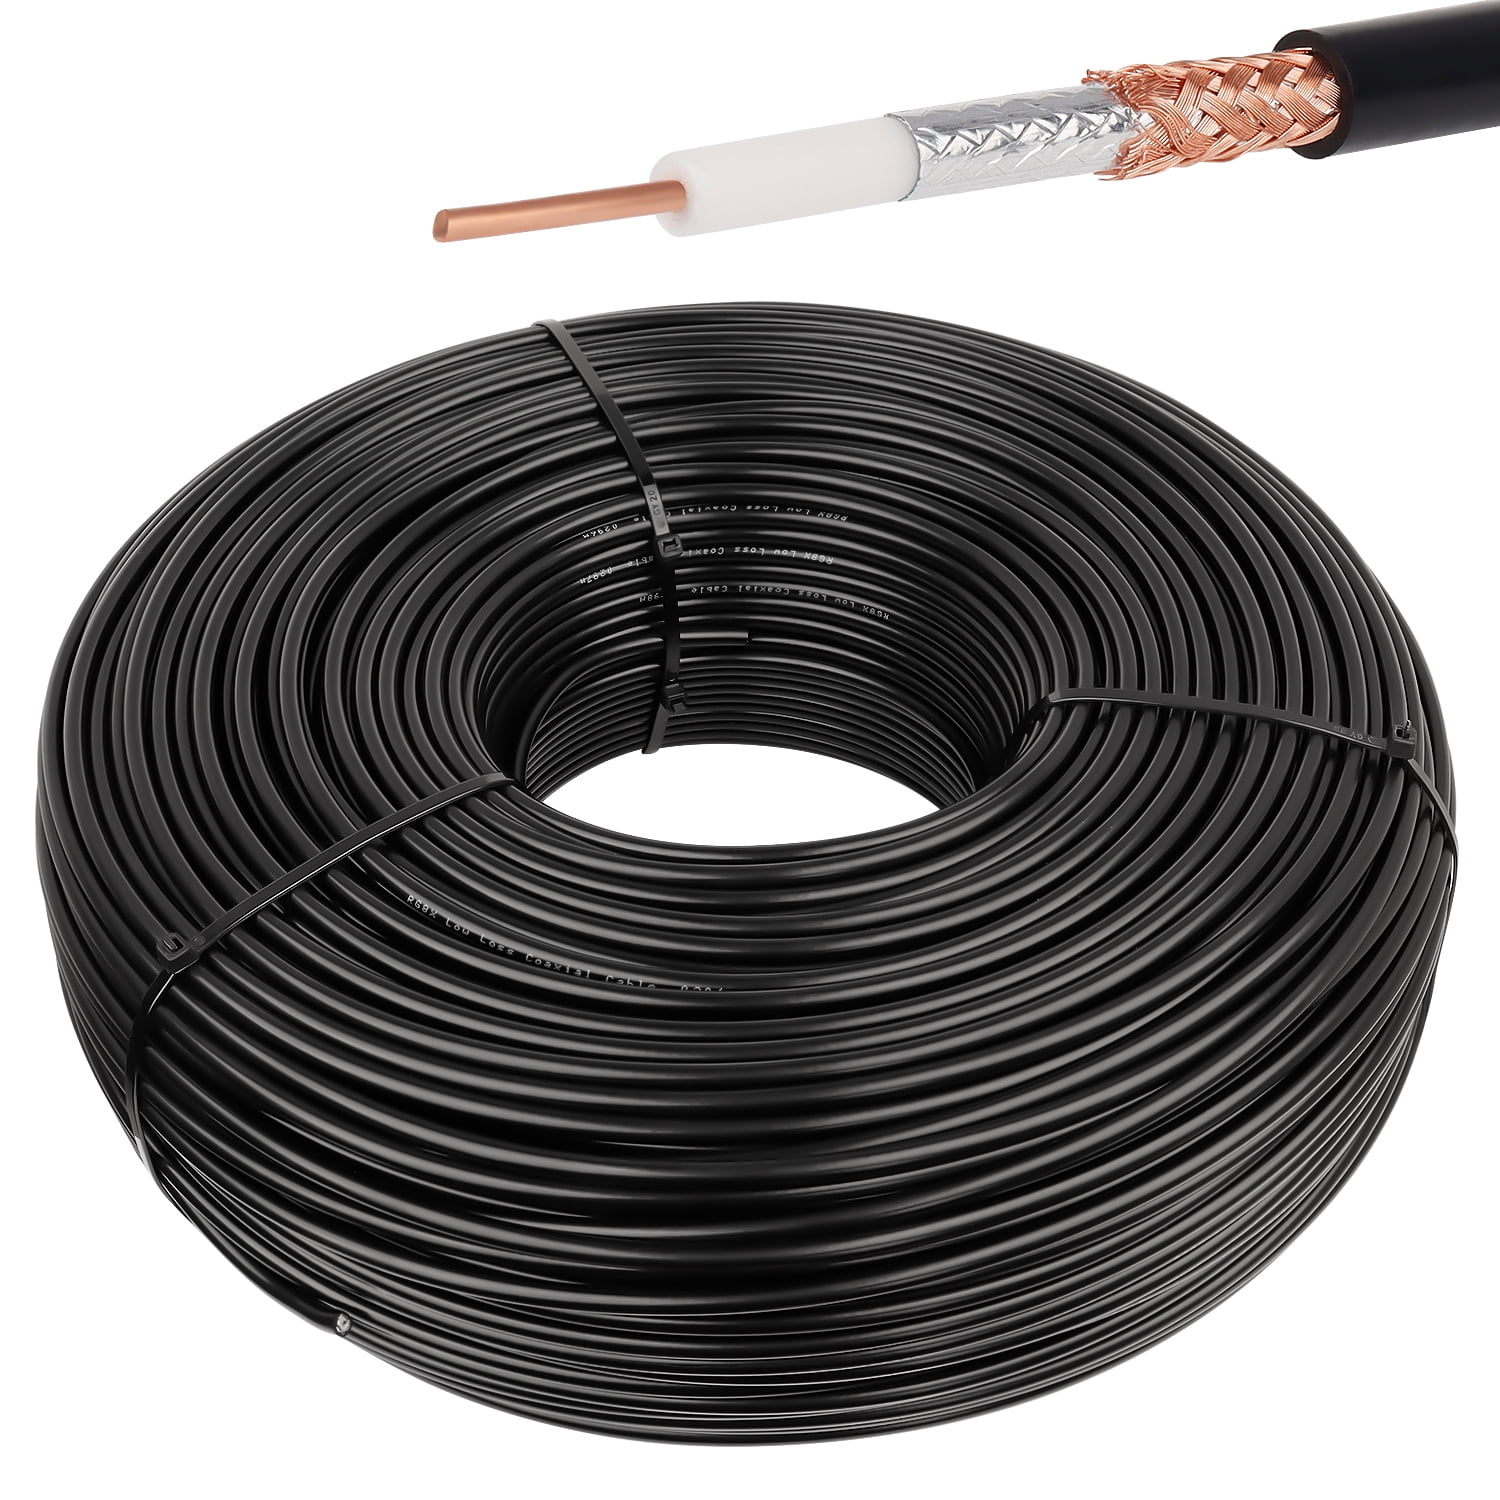 RG8X Extension Cable 100ft, MOOKEERF Flexible Low Loss Coaxial Cable for  Wired & Wireless Network Router 4G Antenna Black Cable Impedance 50 Ohm  RG8X RF Coax Pigtail Cable